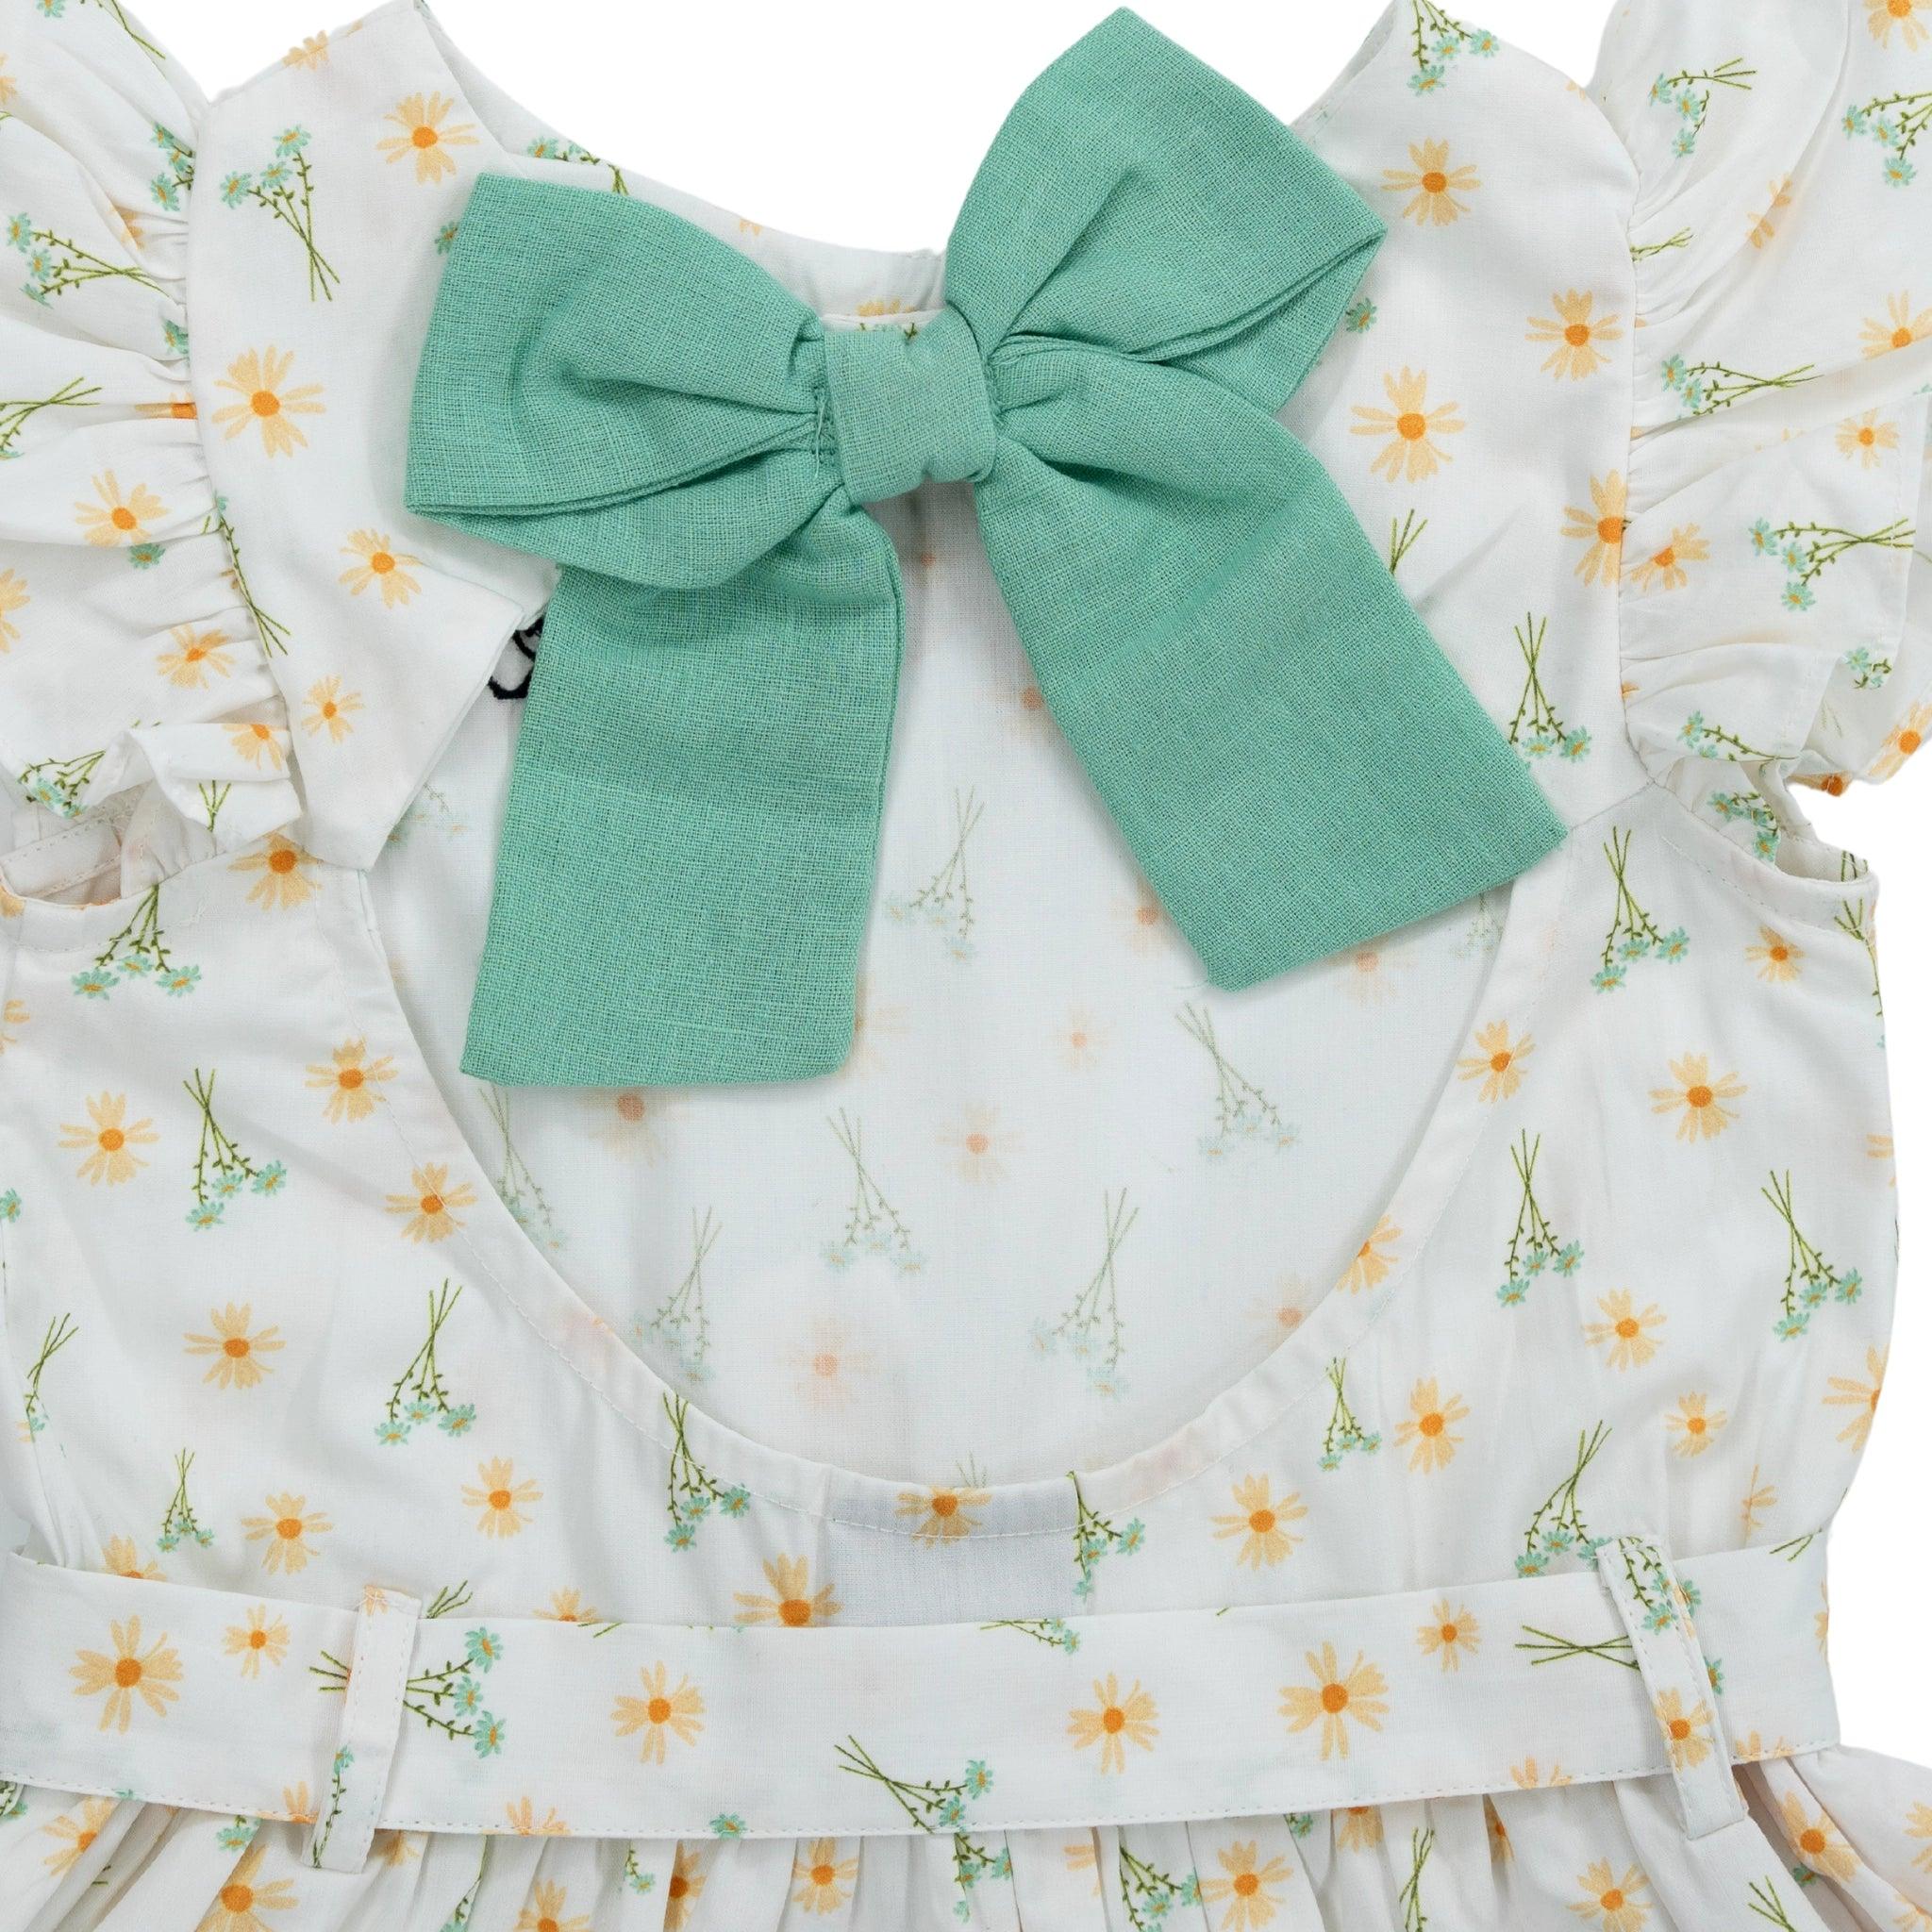 Close-up of a high-quality Karee Petite Blossom Cotton Dress in Smoked Pearl with a large teal bow on the neckline.